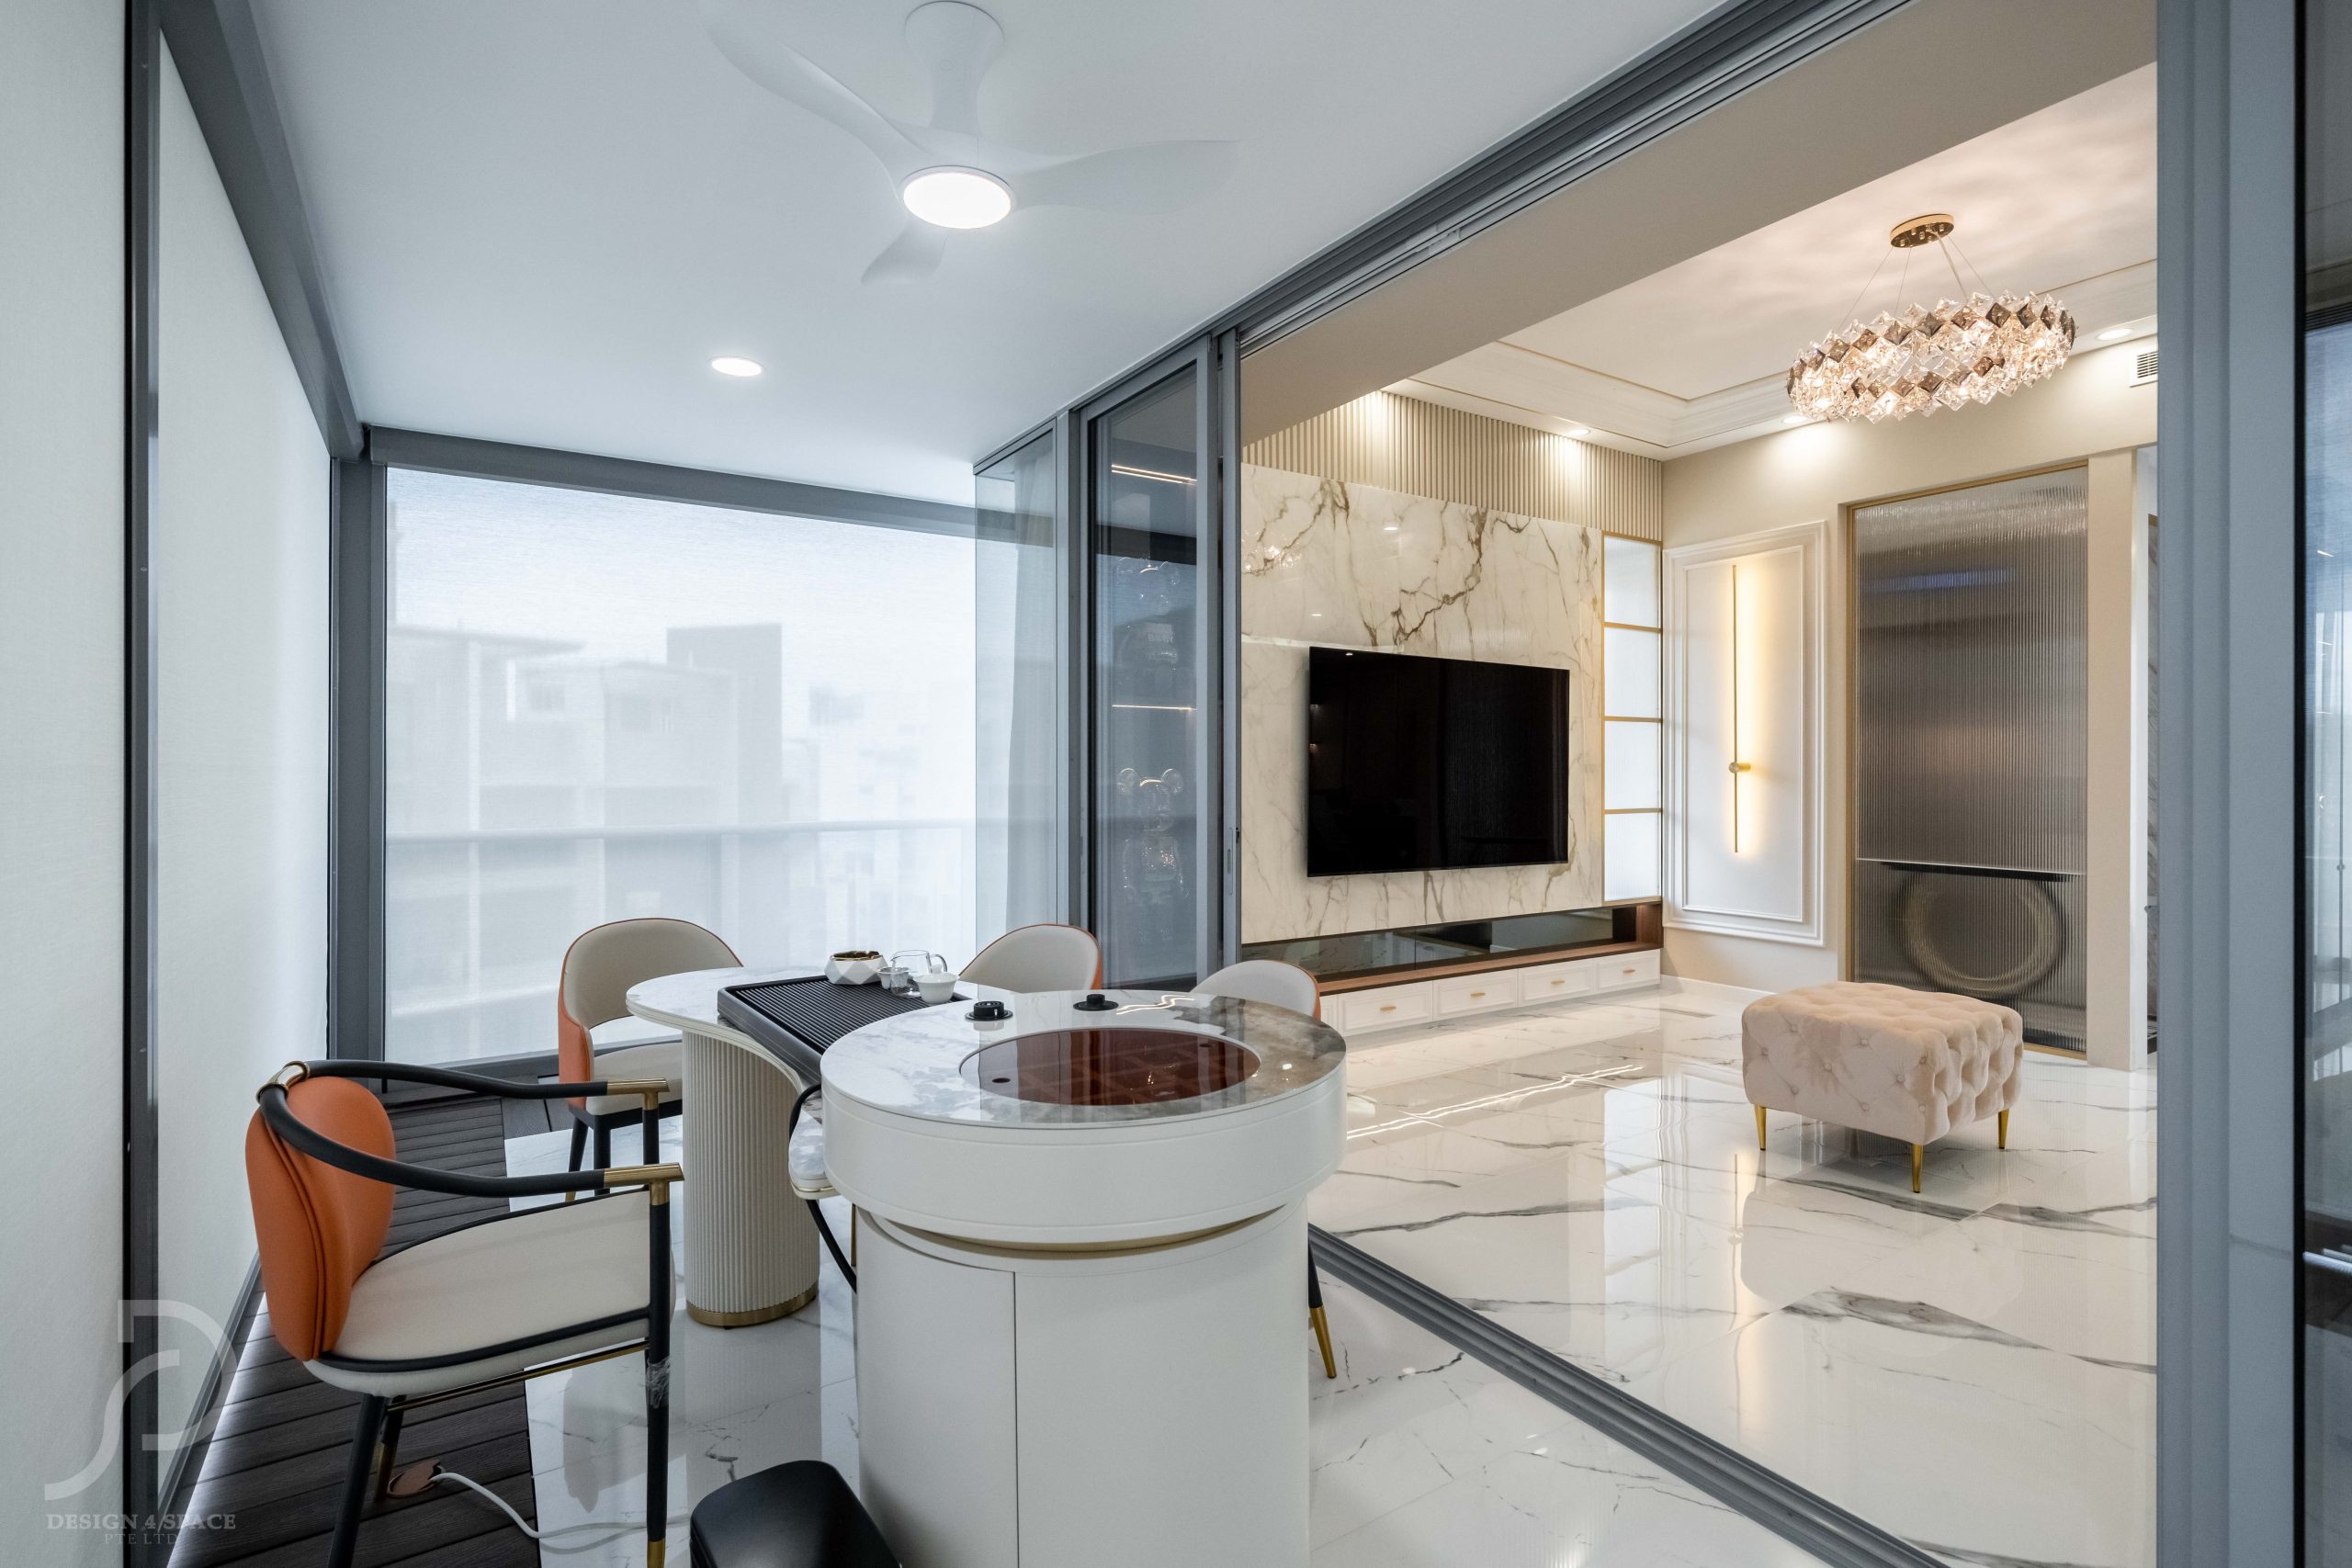 419 - paterson suites - jianwen - tpy - watermark23